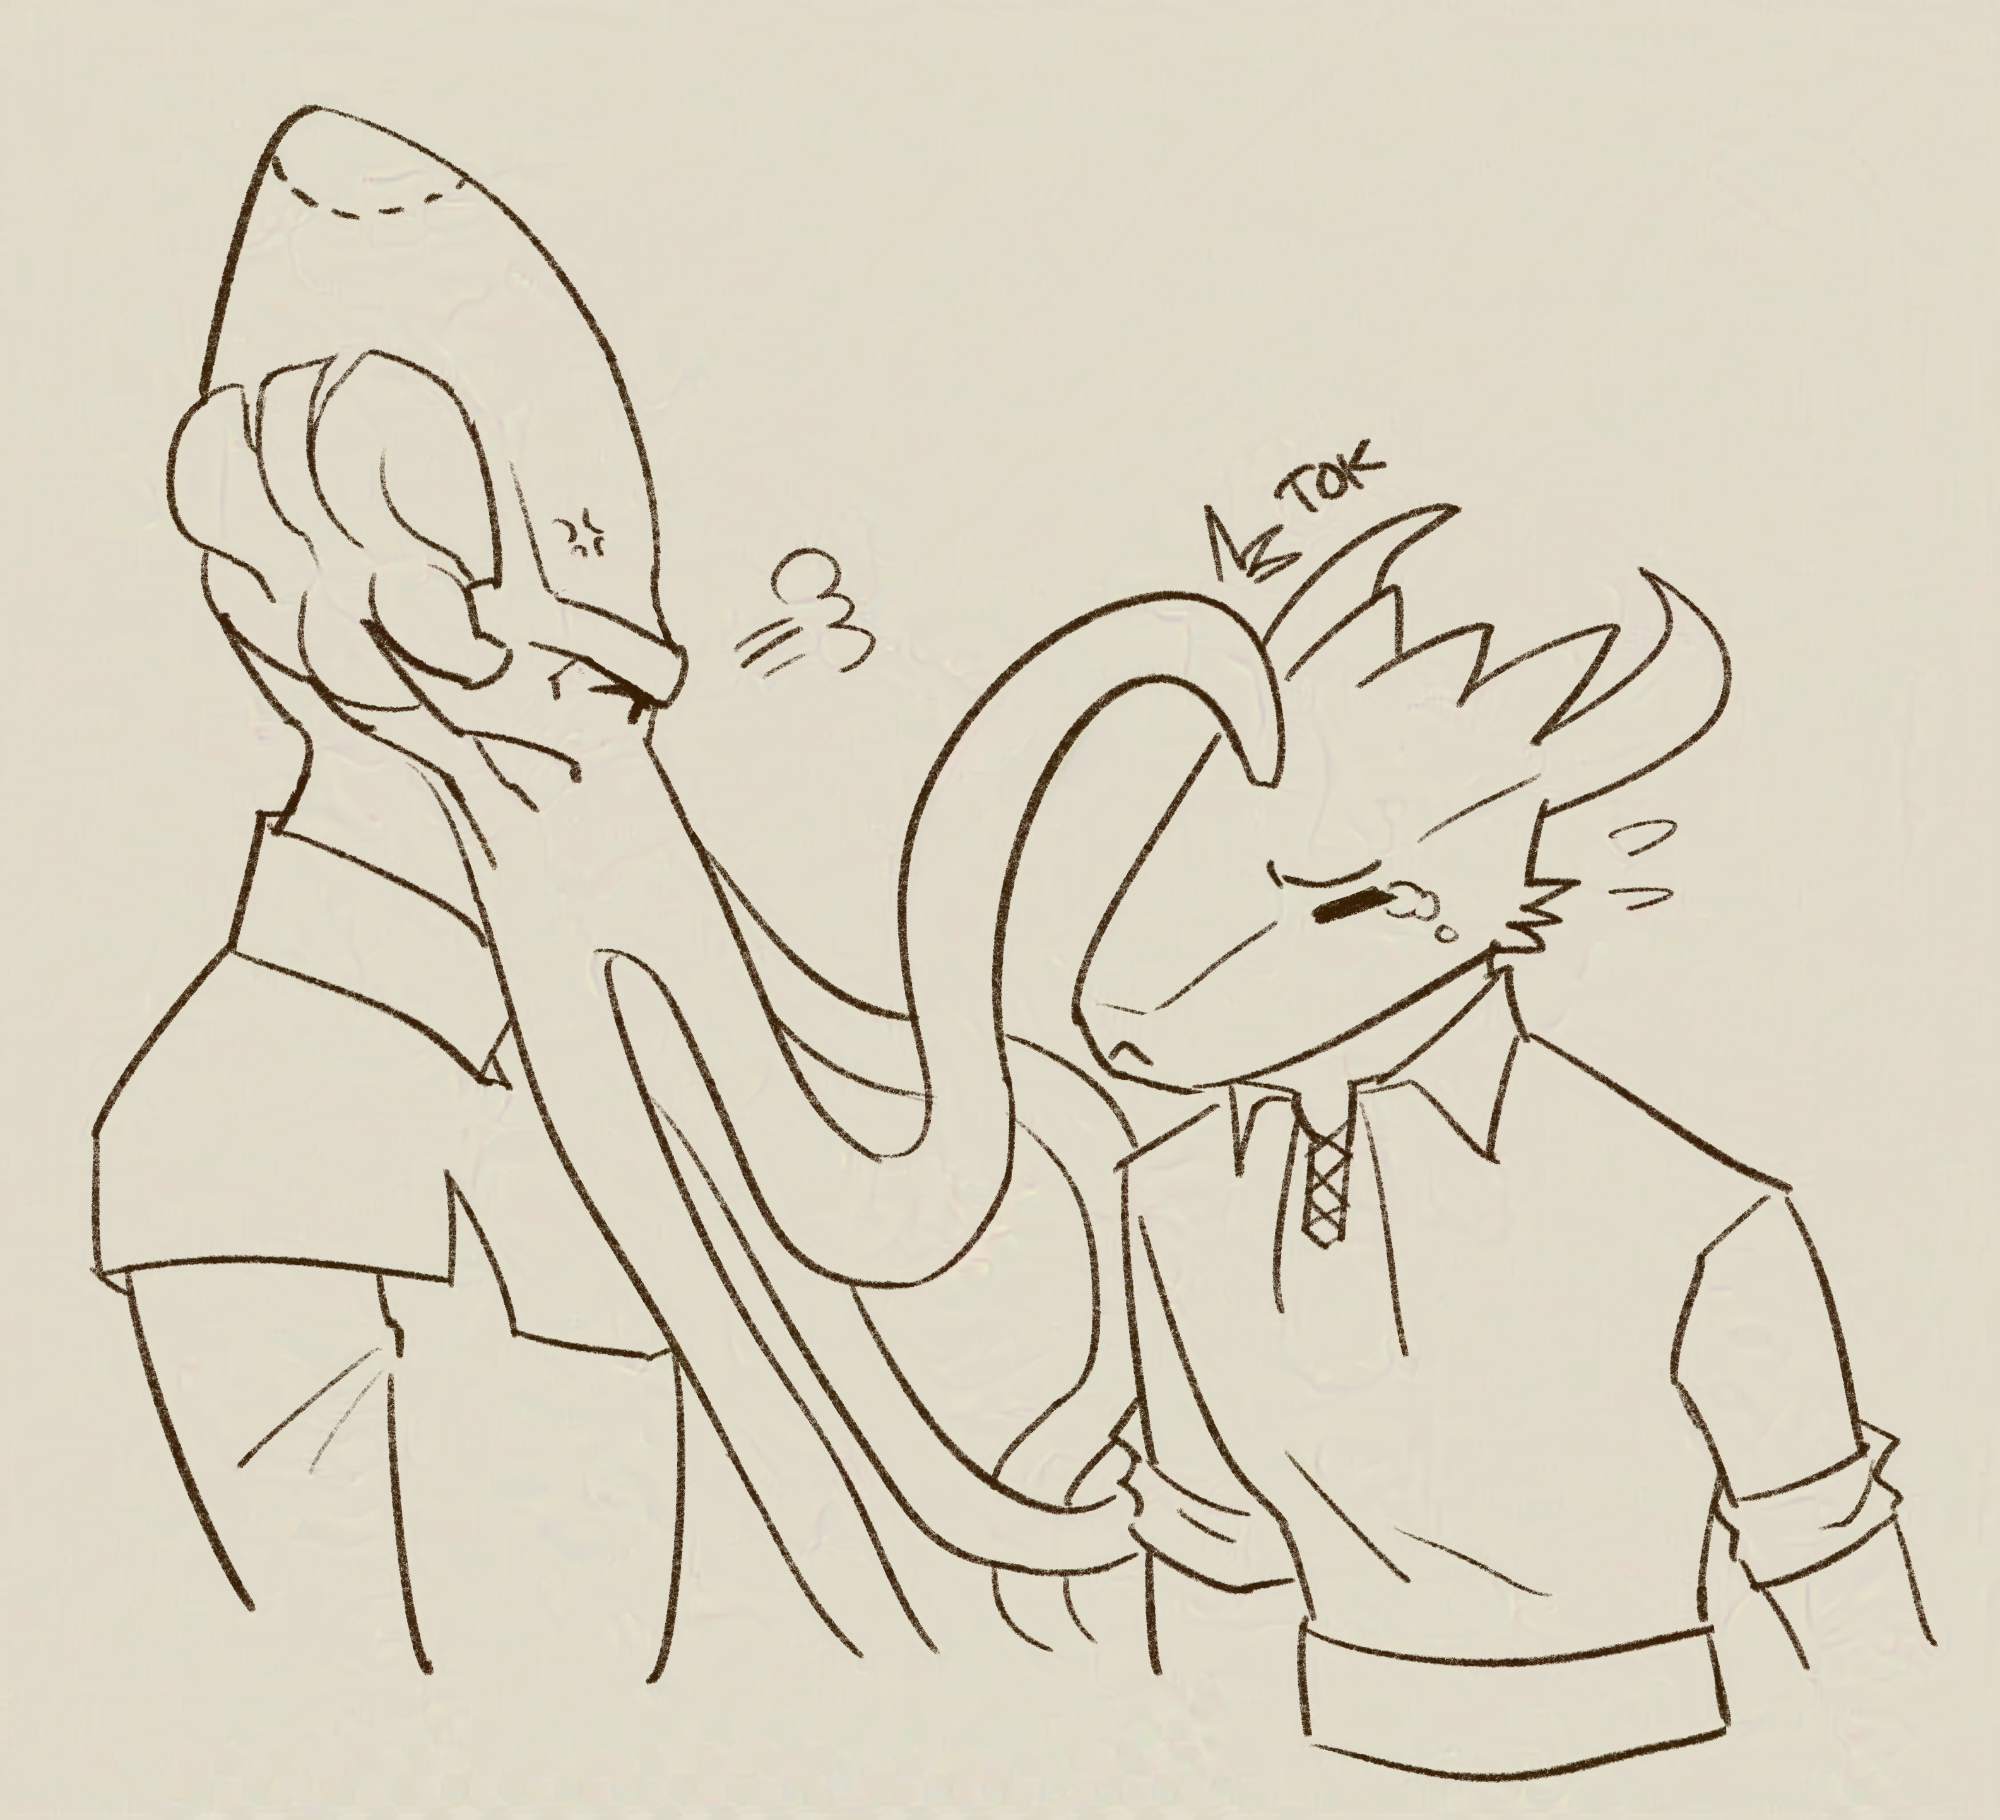 The Emperor (an illithid) is reprimanding Daamric (a dragonborn) by slapping a tentacle on the latter's head. The Emperor looks annoyed with a visible bite mark on the top of his head, and Daamric looks apologetic.